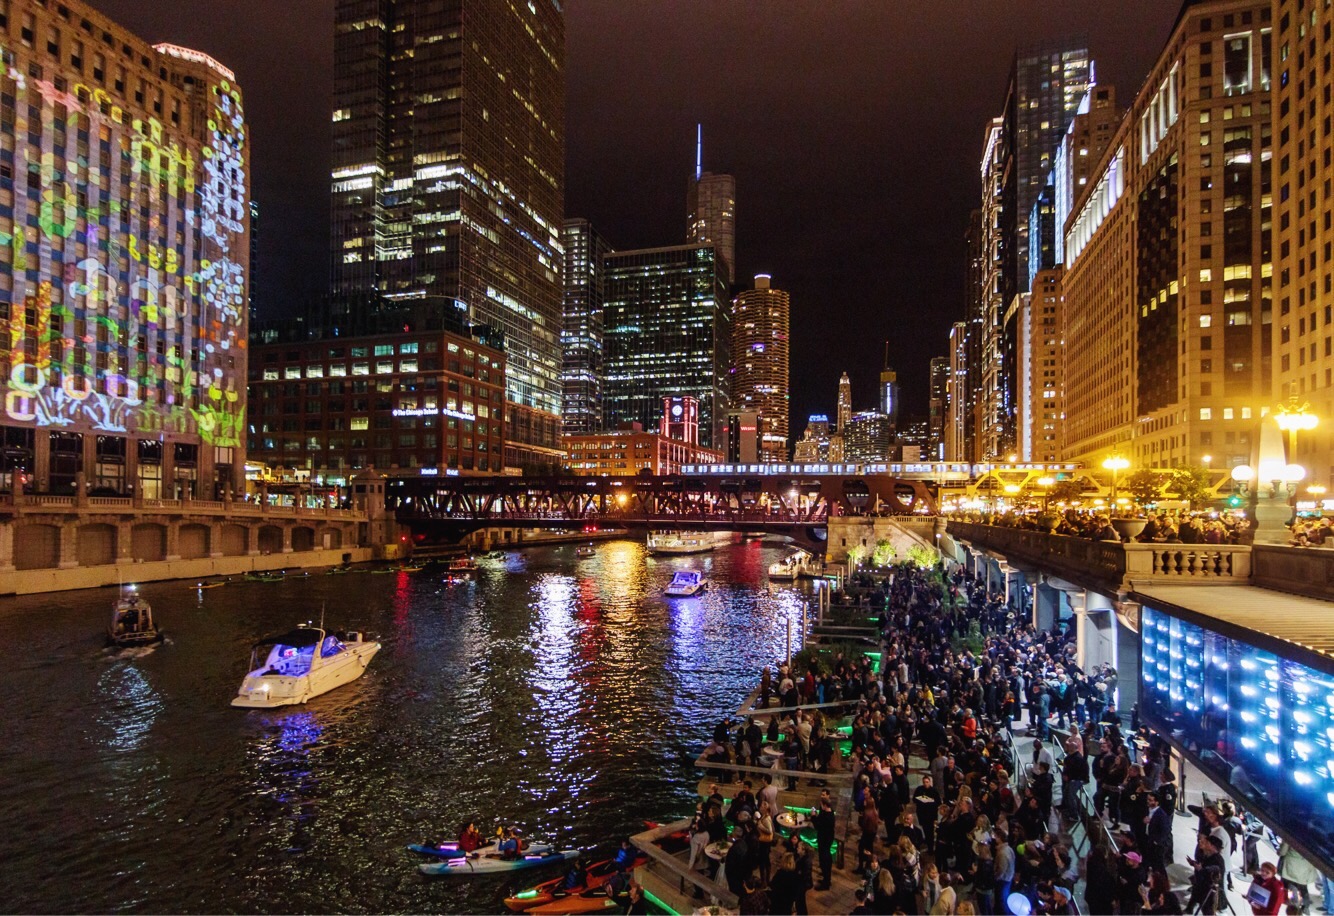 Image of the city and Chicago River at night. The buildings are lit up and reflected in the river.